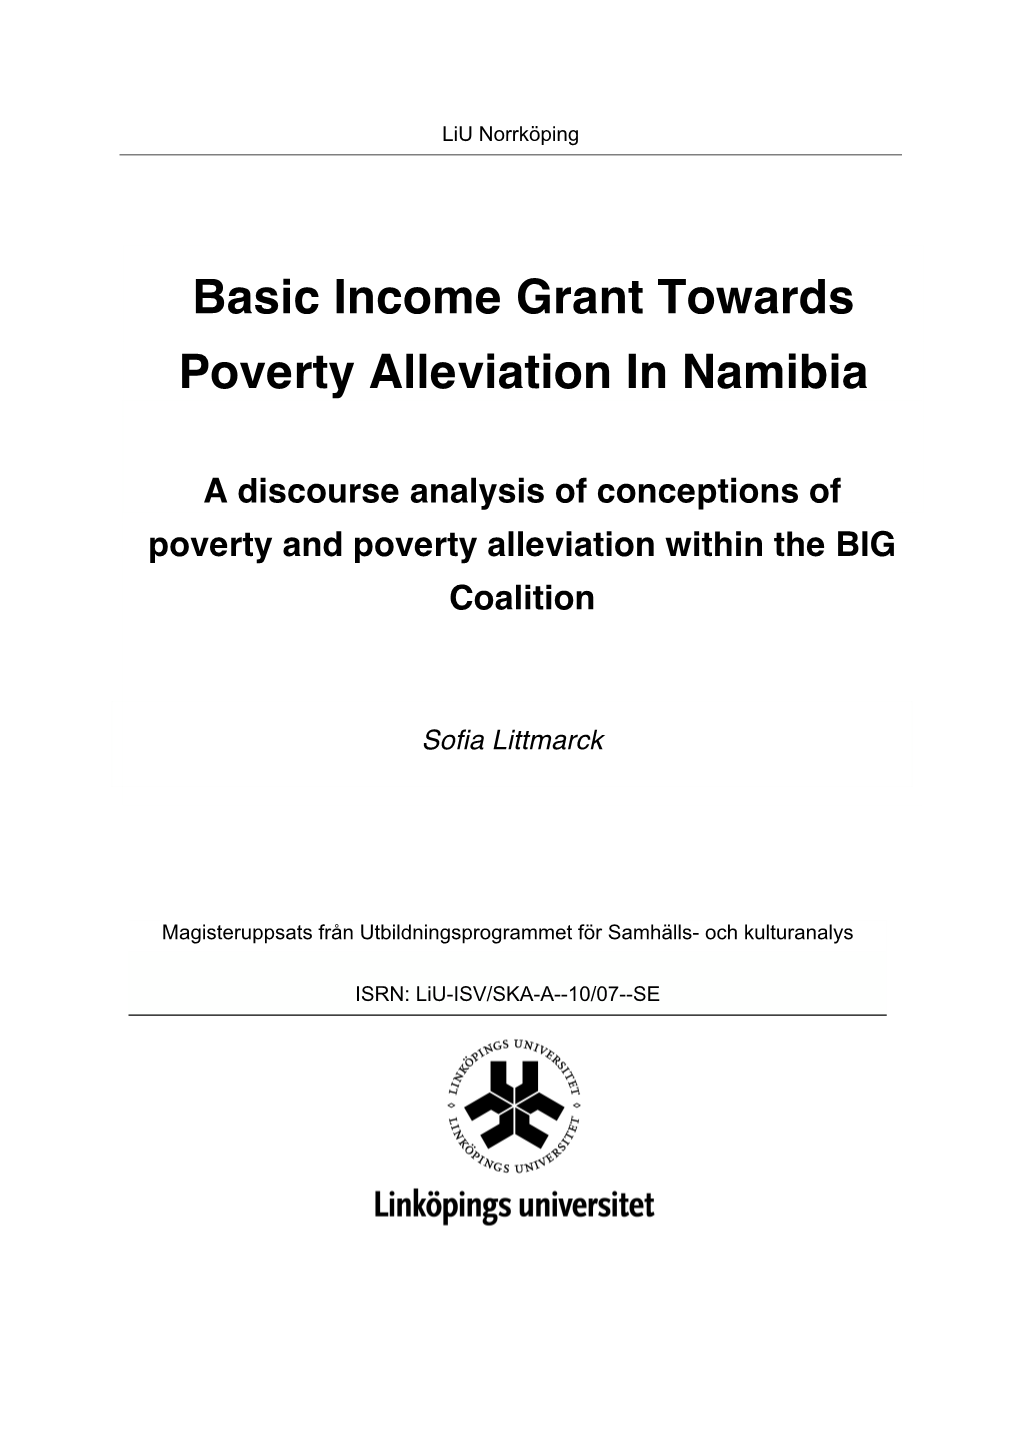 Basic Income Grant Towards Poverty Alleviation in Namibia